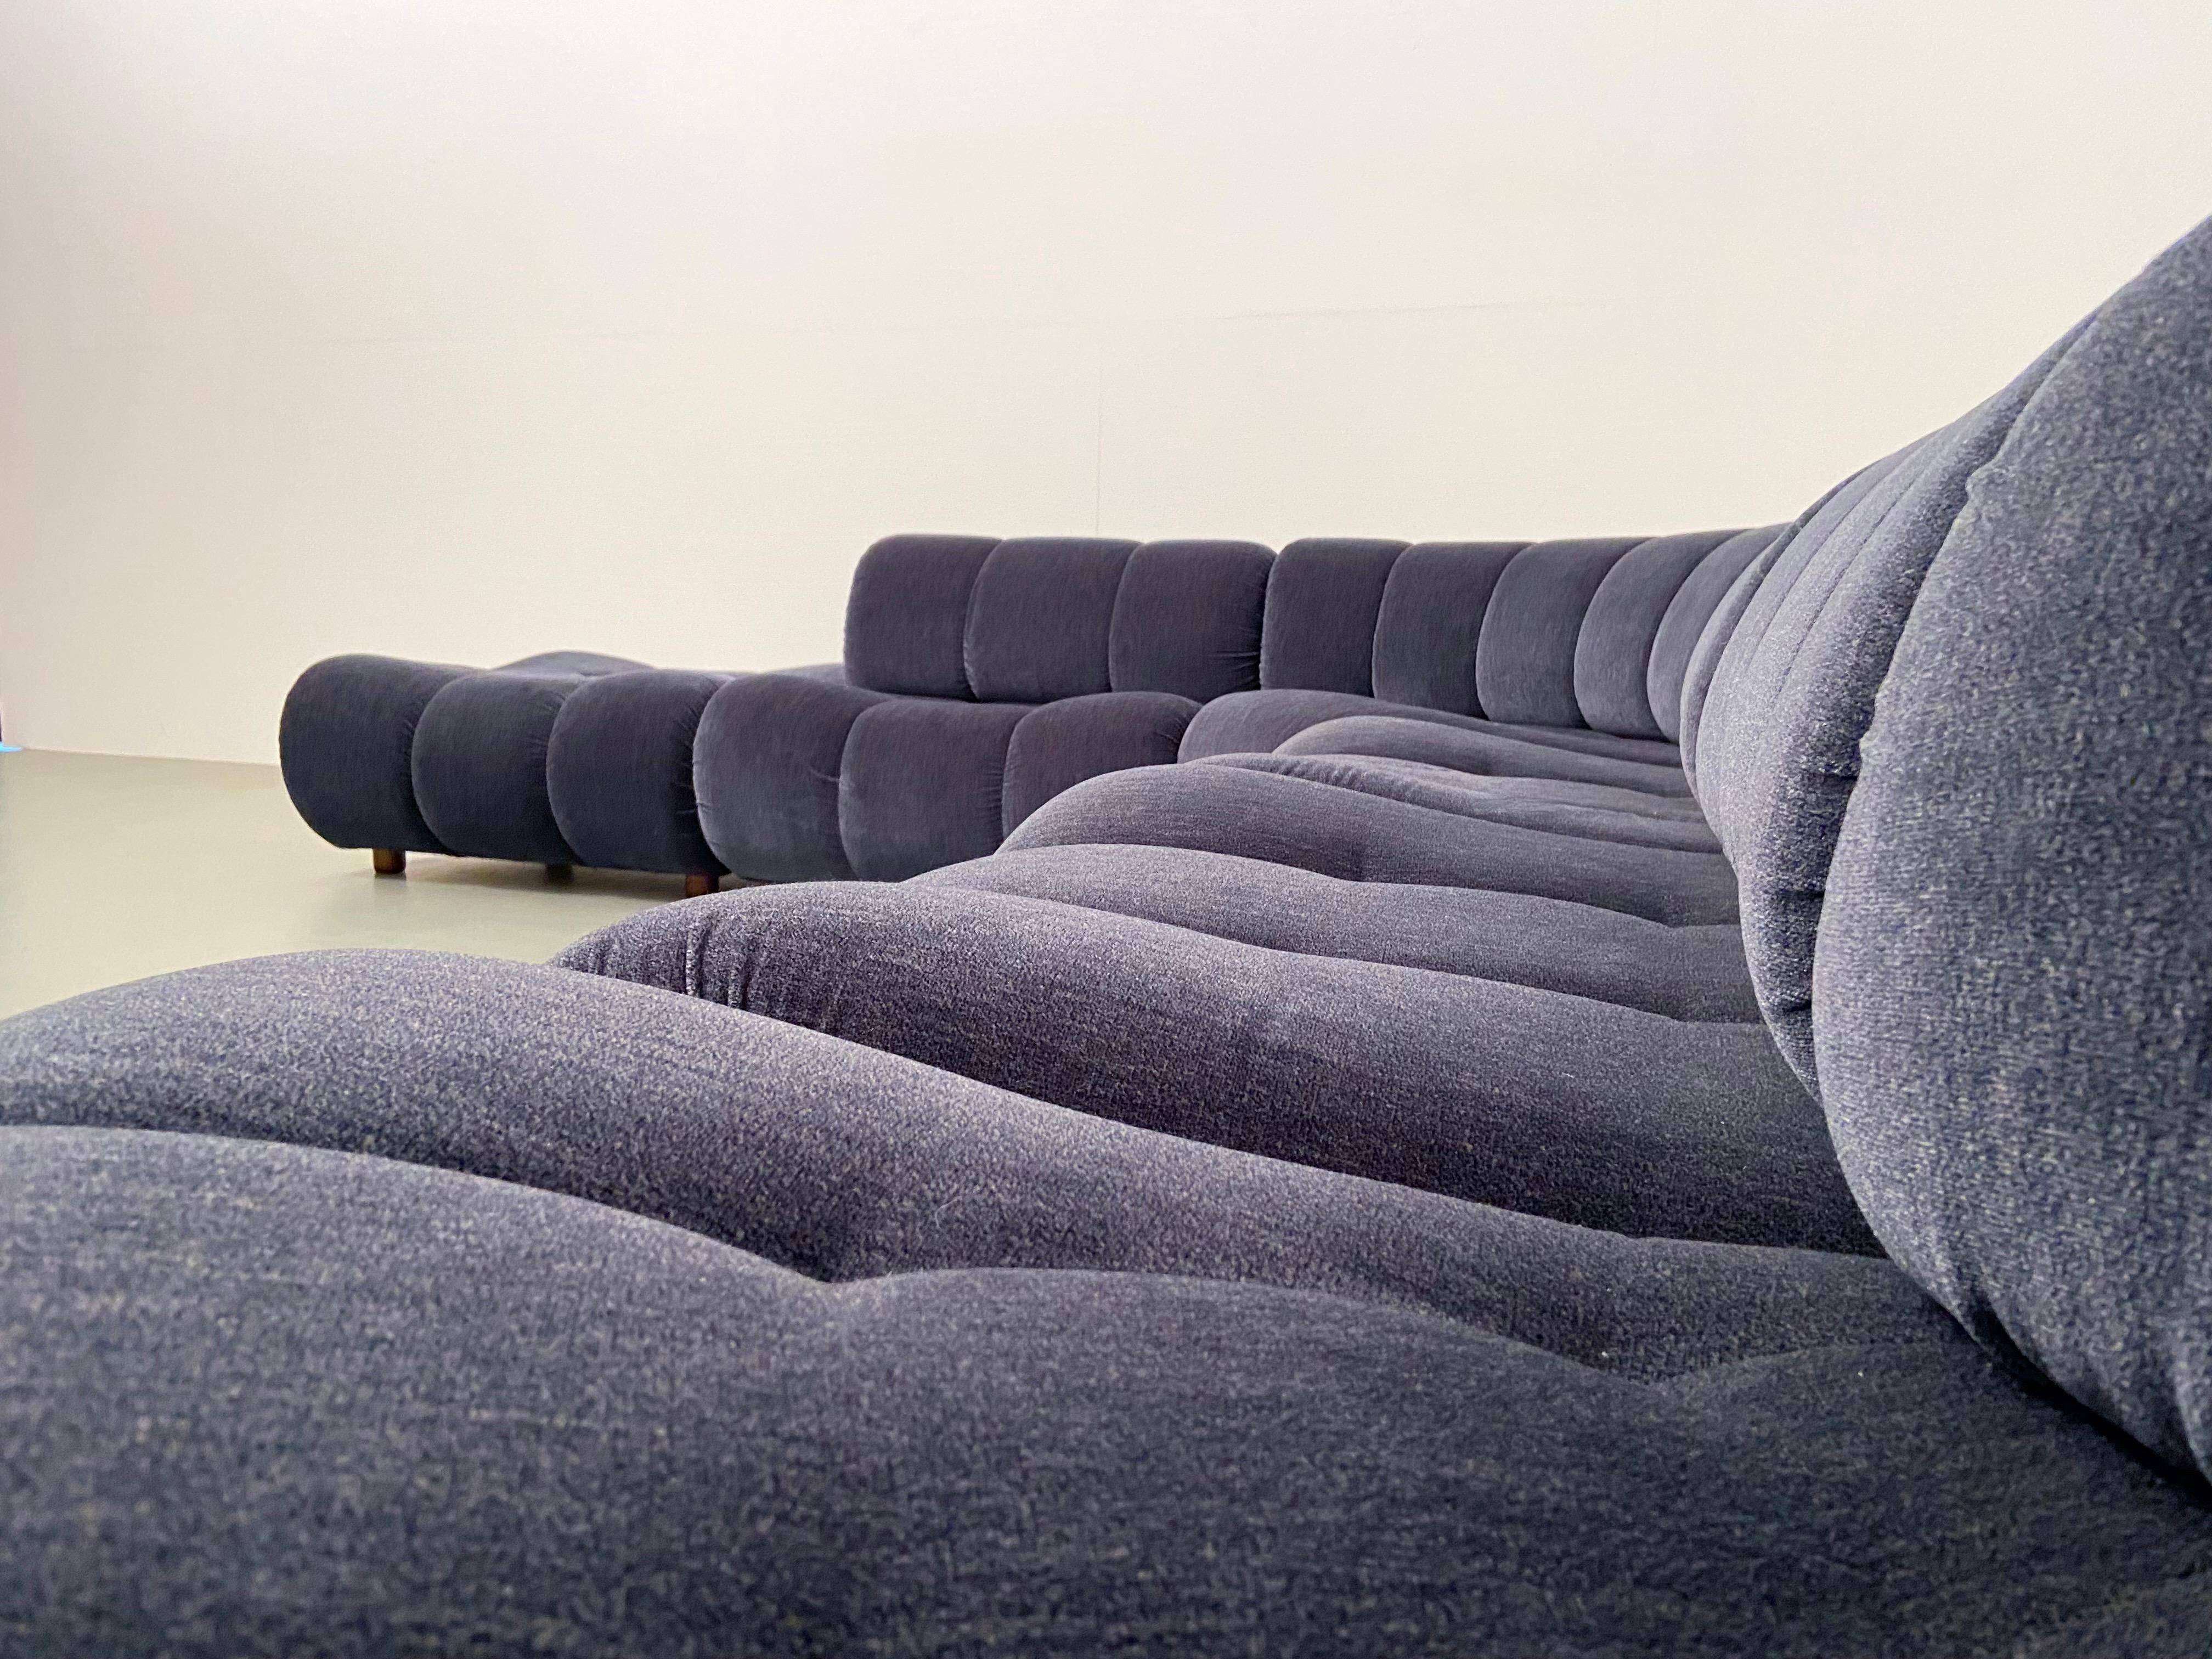 Large Modular Sofa by Giuseppe Munari for Poltrona Munari, Italy, 1970's In Good Condition For Sale In Amsterdam, NL